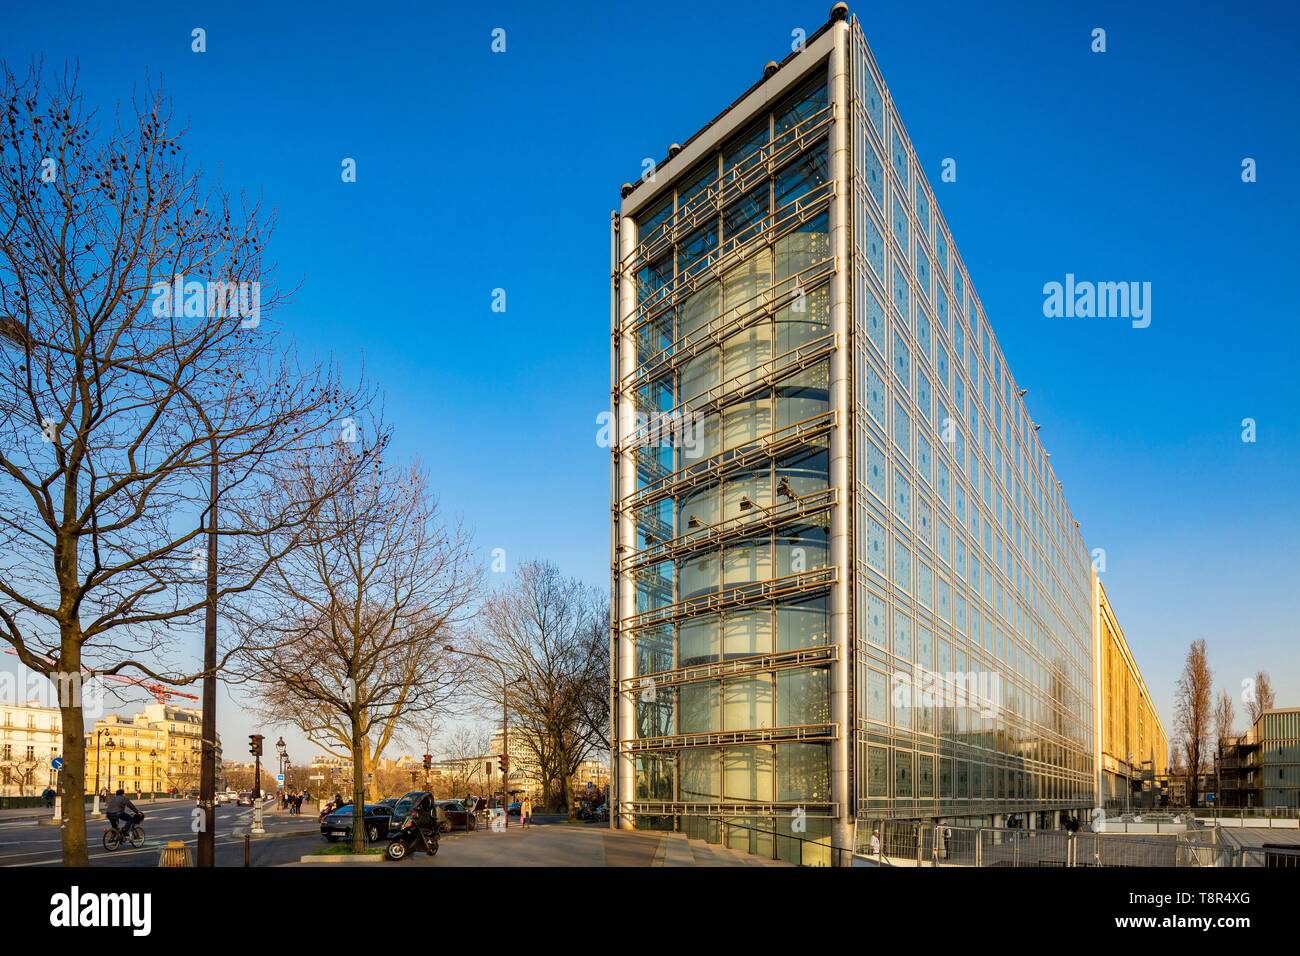 France, Paris, Institute of the Arab World (IMA), designed by architects Jean Nouvel and Architecture Studio Stock Photo